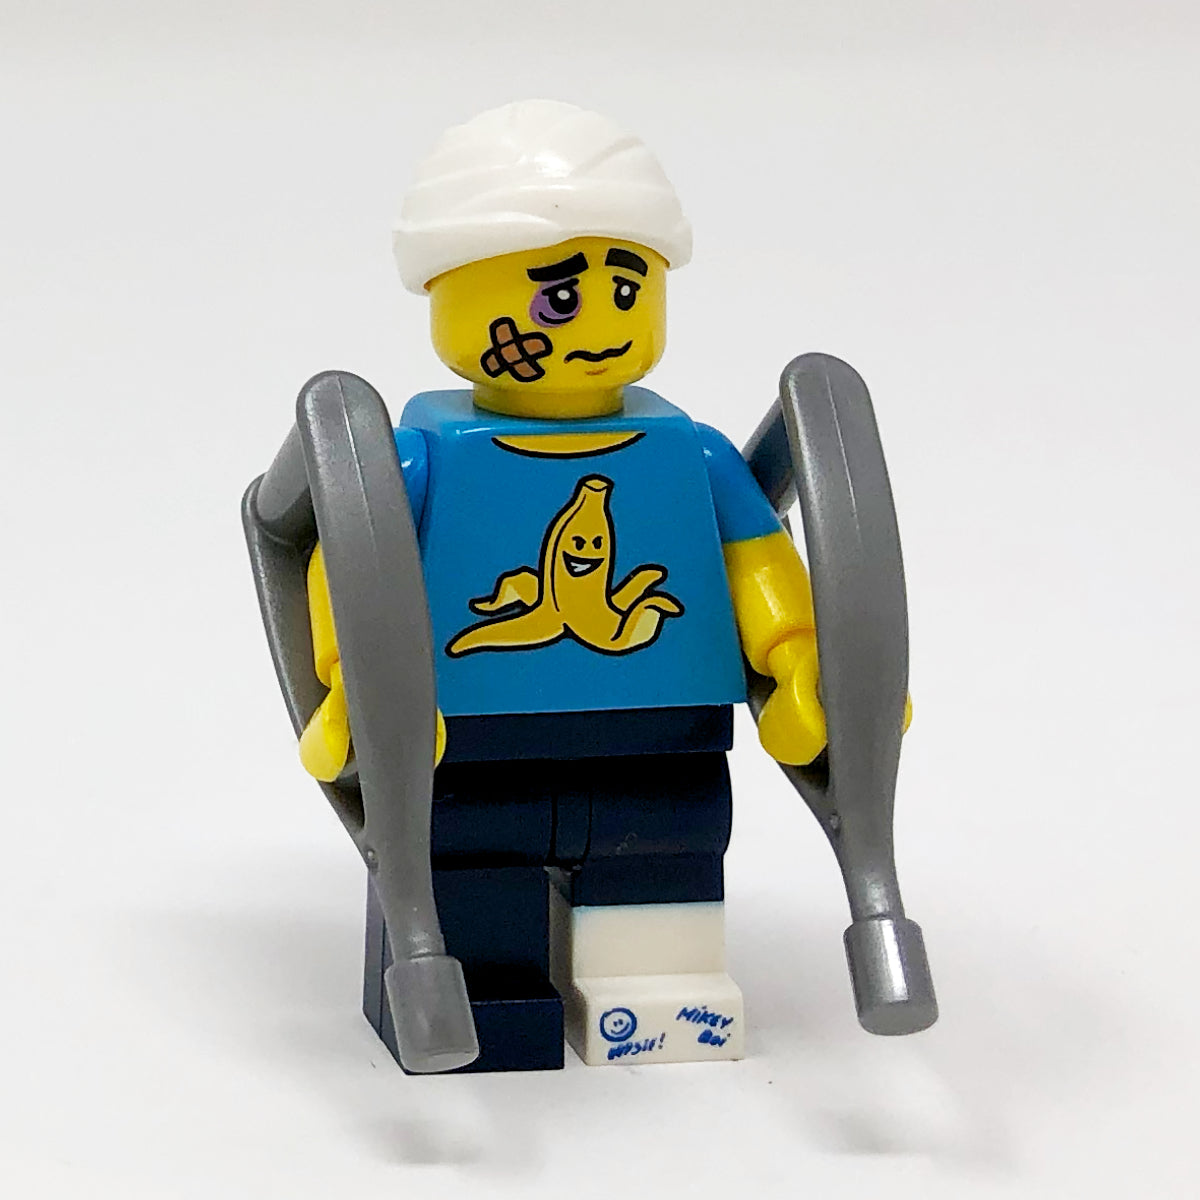 S15 Clumsy Guy - Series 15 Minifigure (col231)